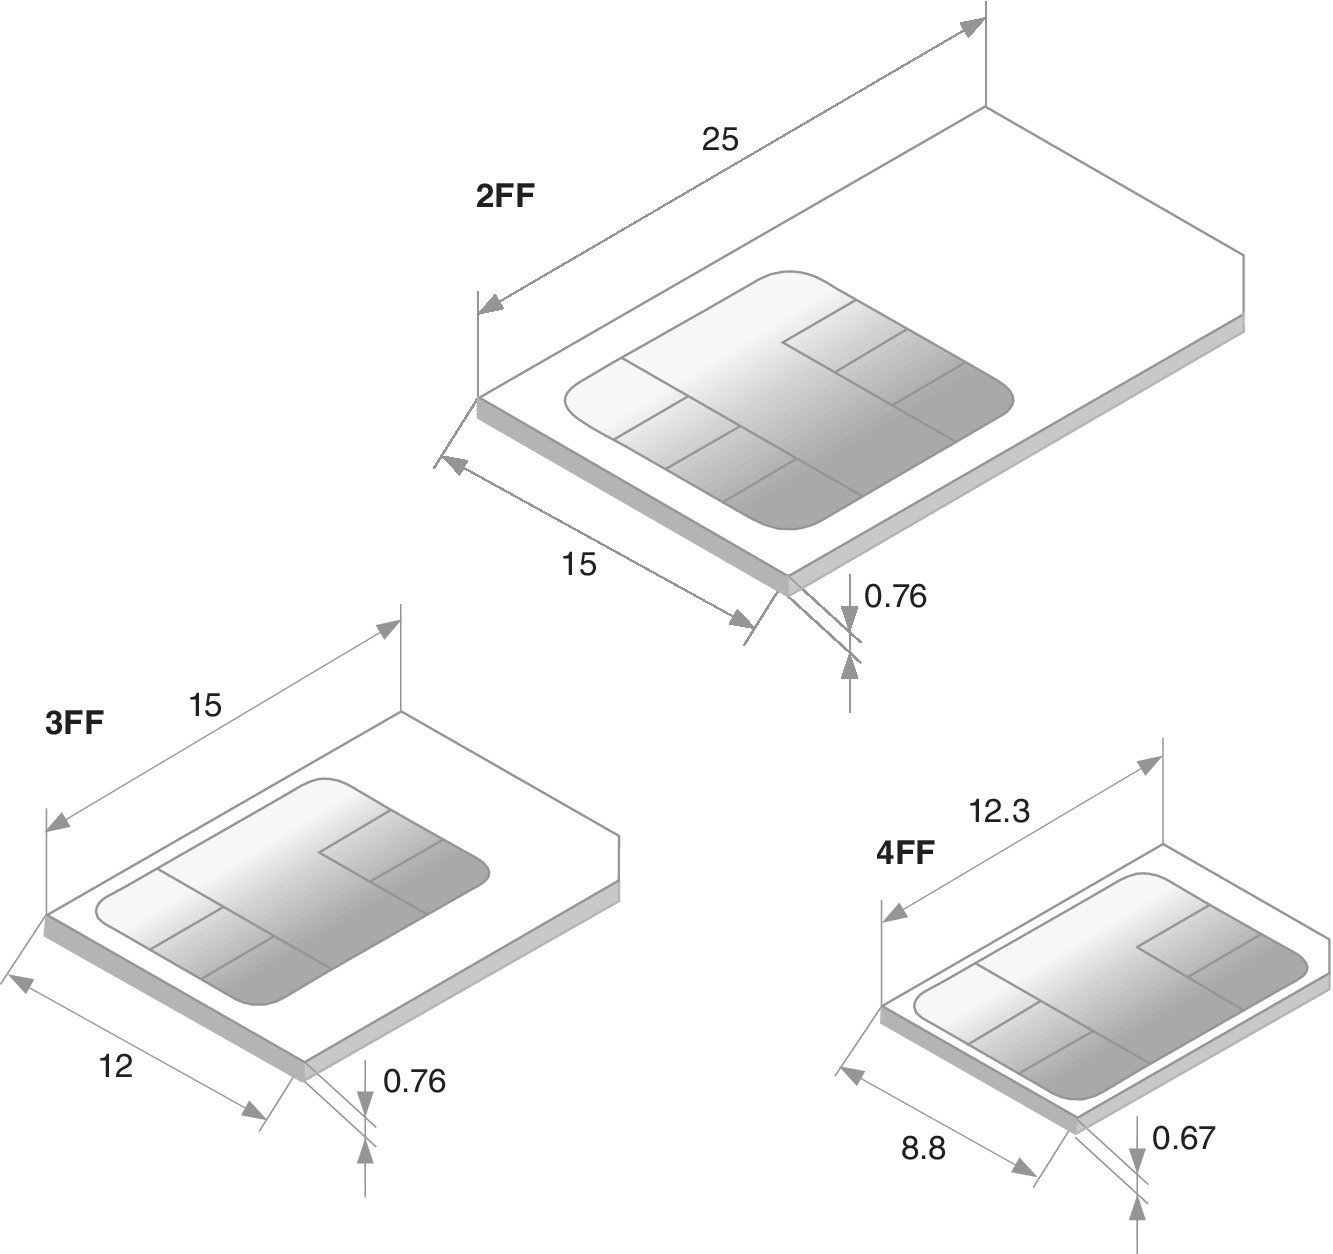 Schematic illustrations of SIM card’s 2FF (top), 3FF (bottom-left), and 4FF (bottom-right) plug‐in units with dimensions depicted in mm.